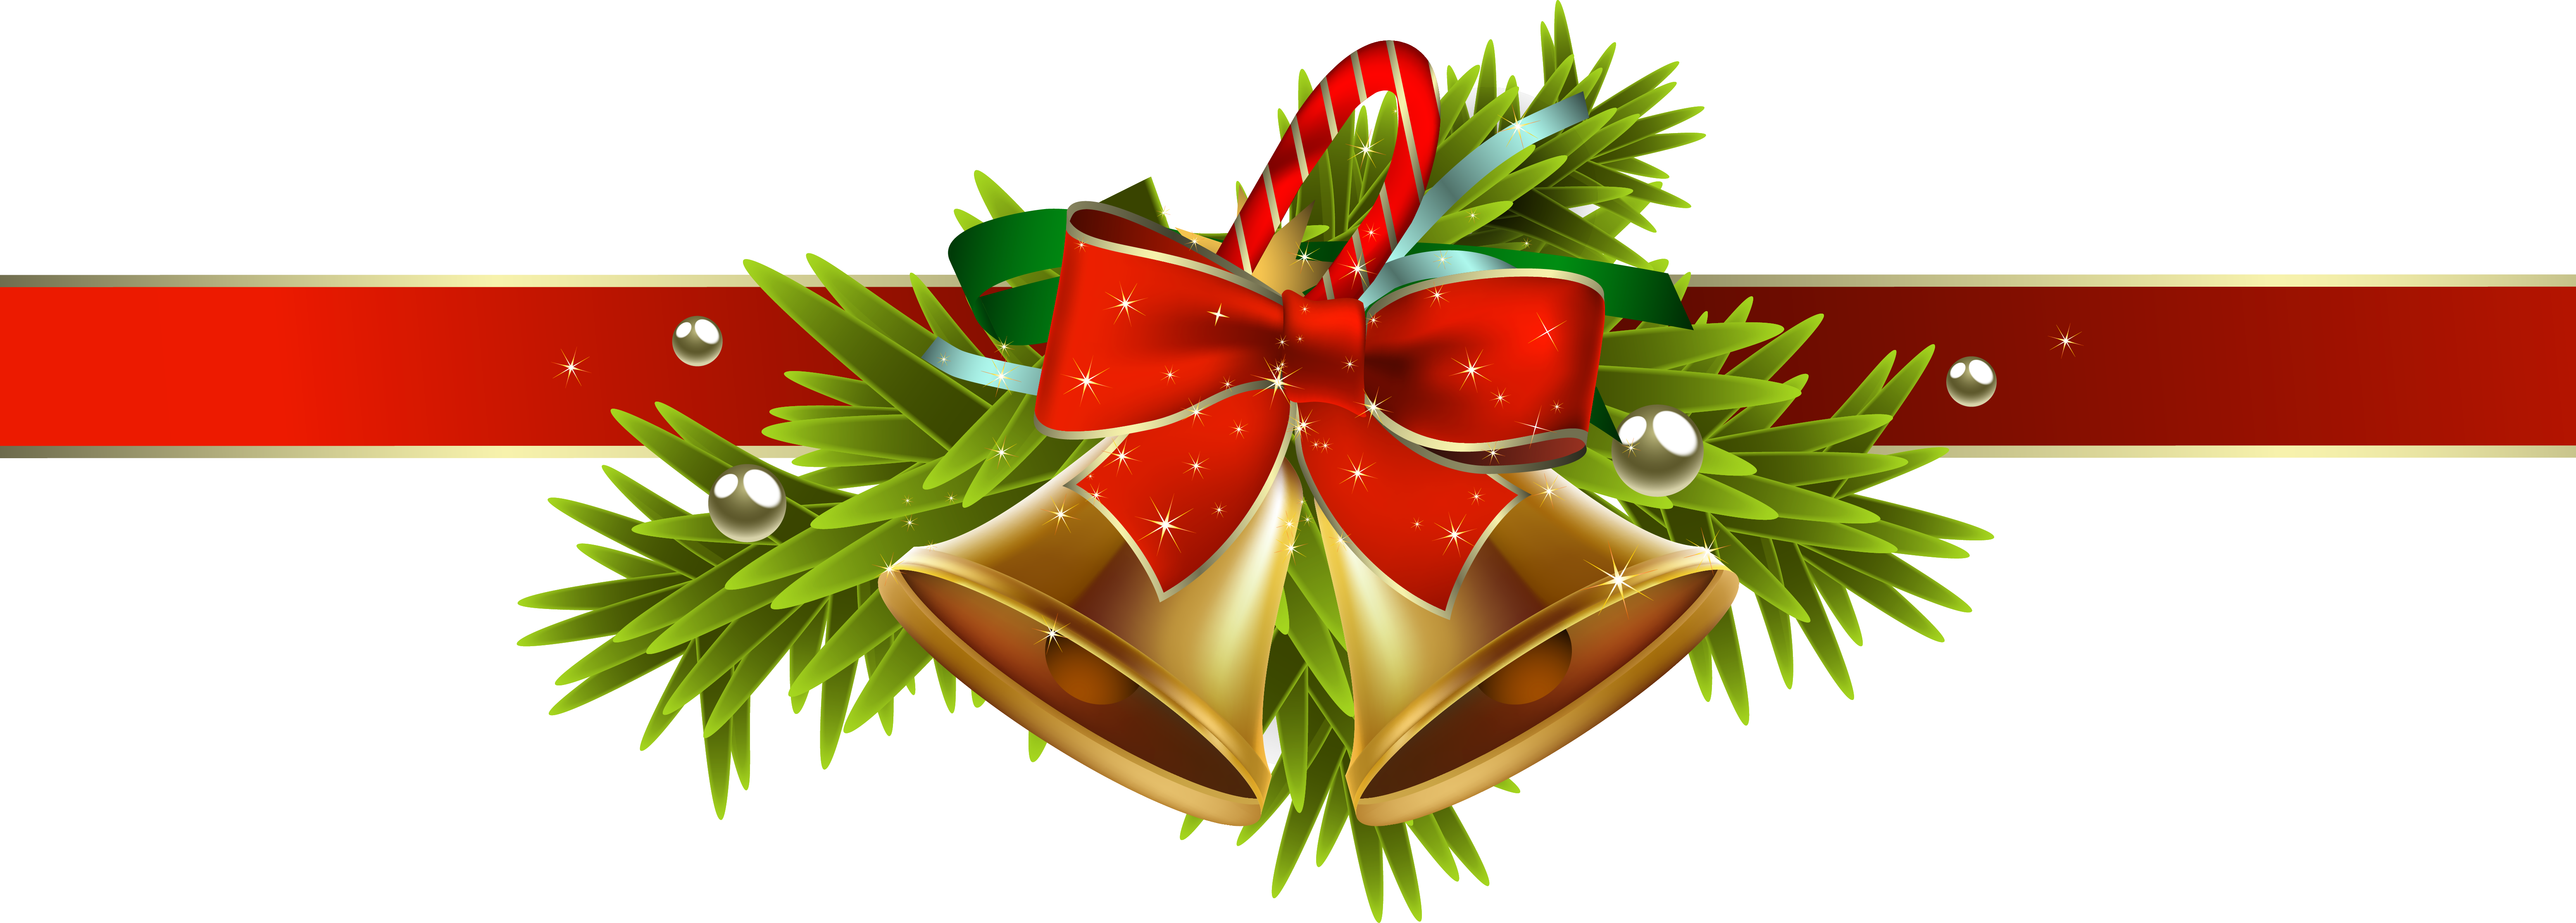 Christmas Ribbon With Christmas Decor PNG Clipart Imag Gallery